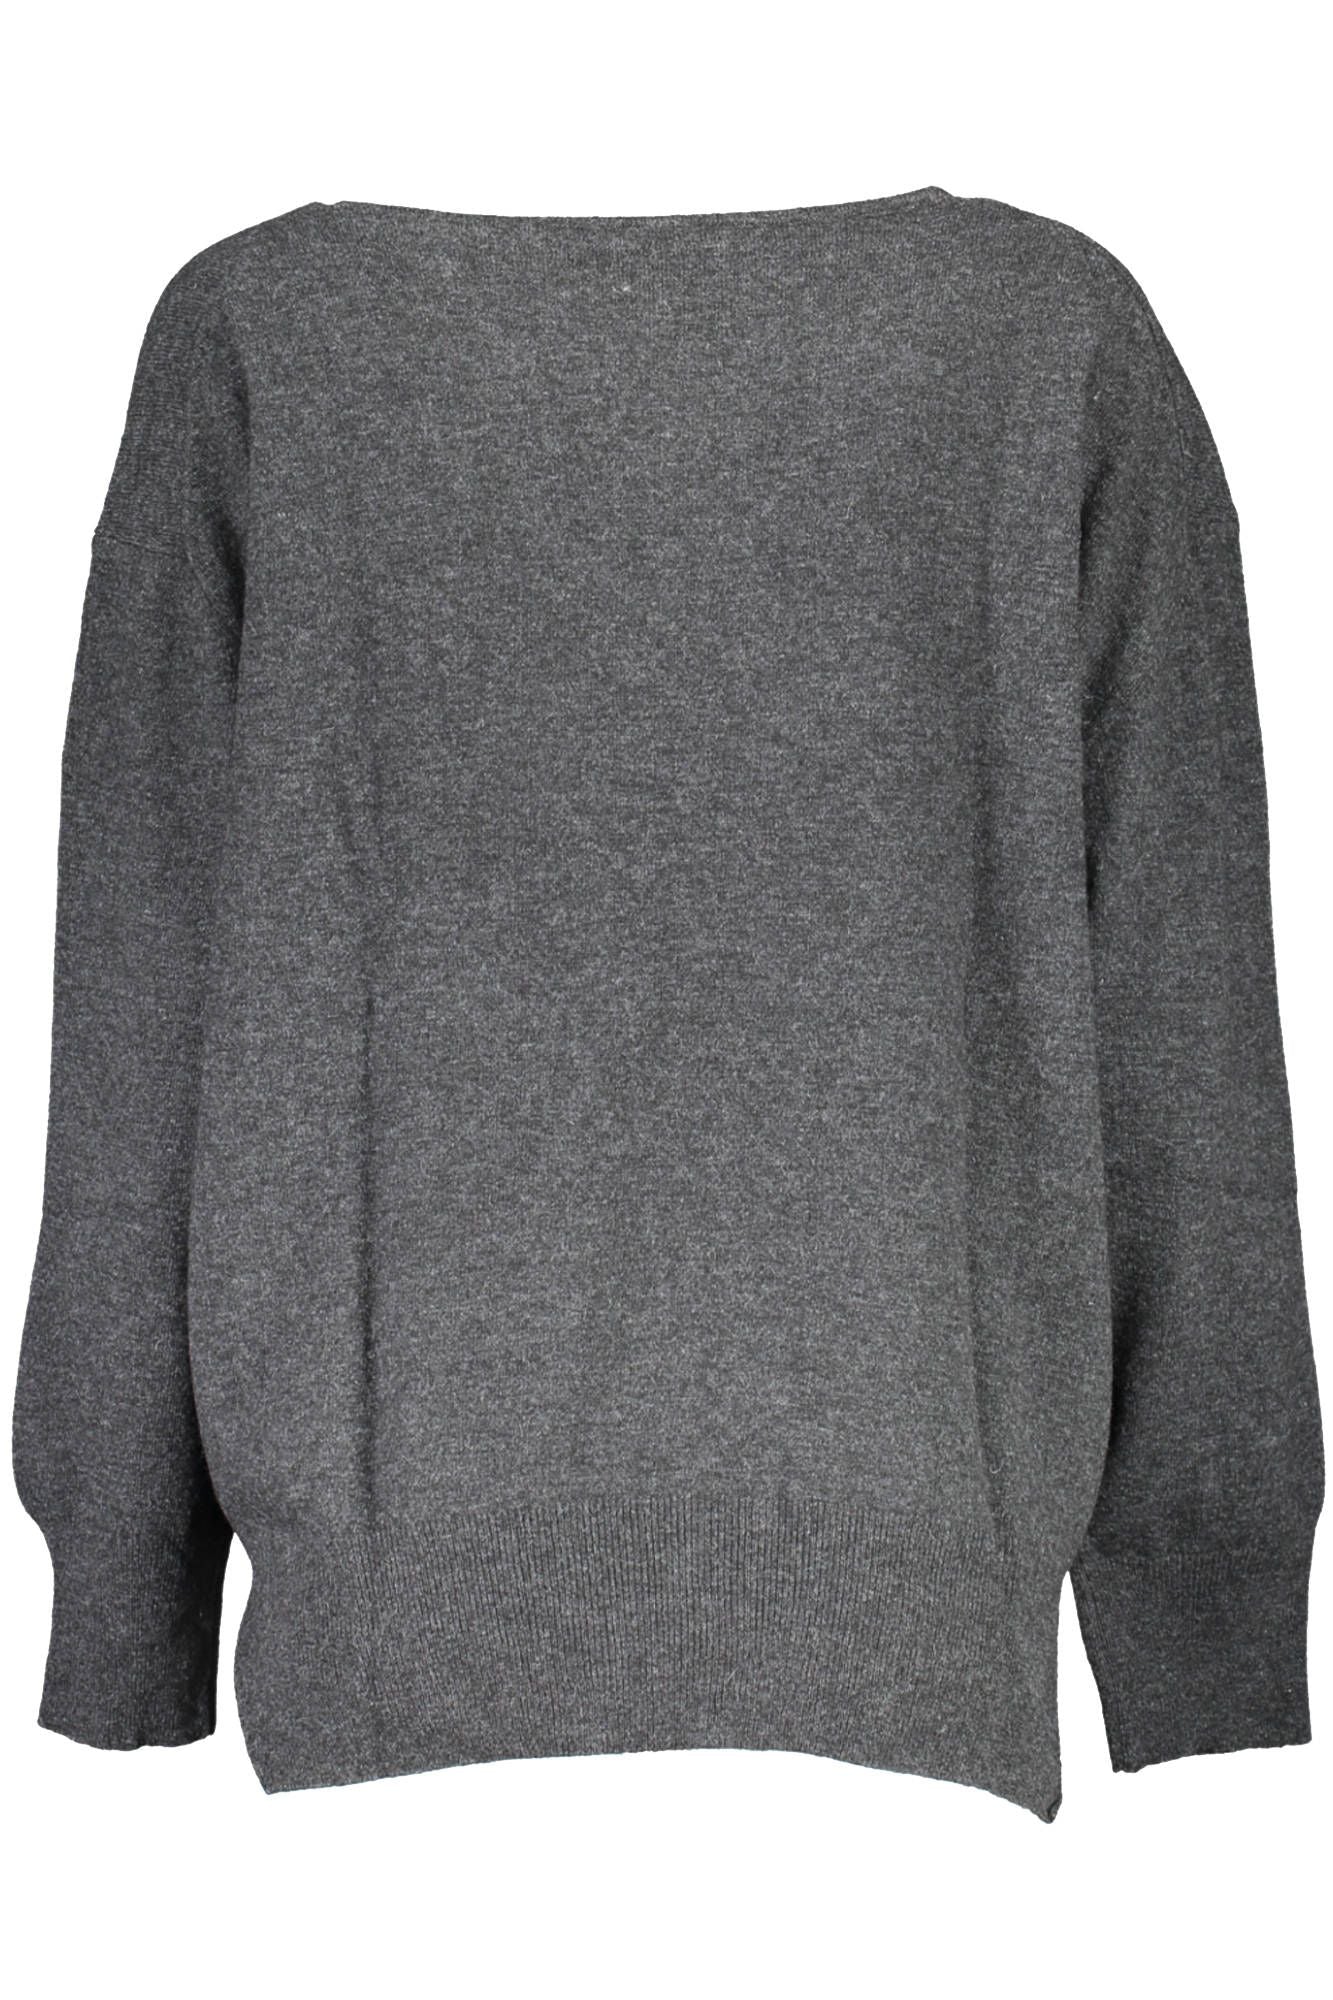 Chic V-Neck Recycled Fibers Sweater